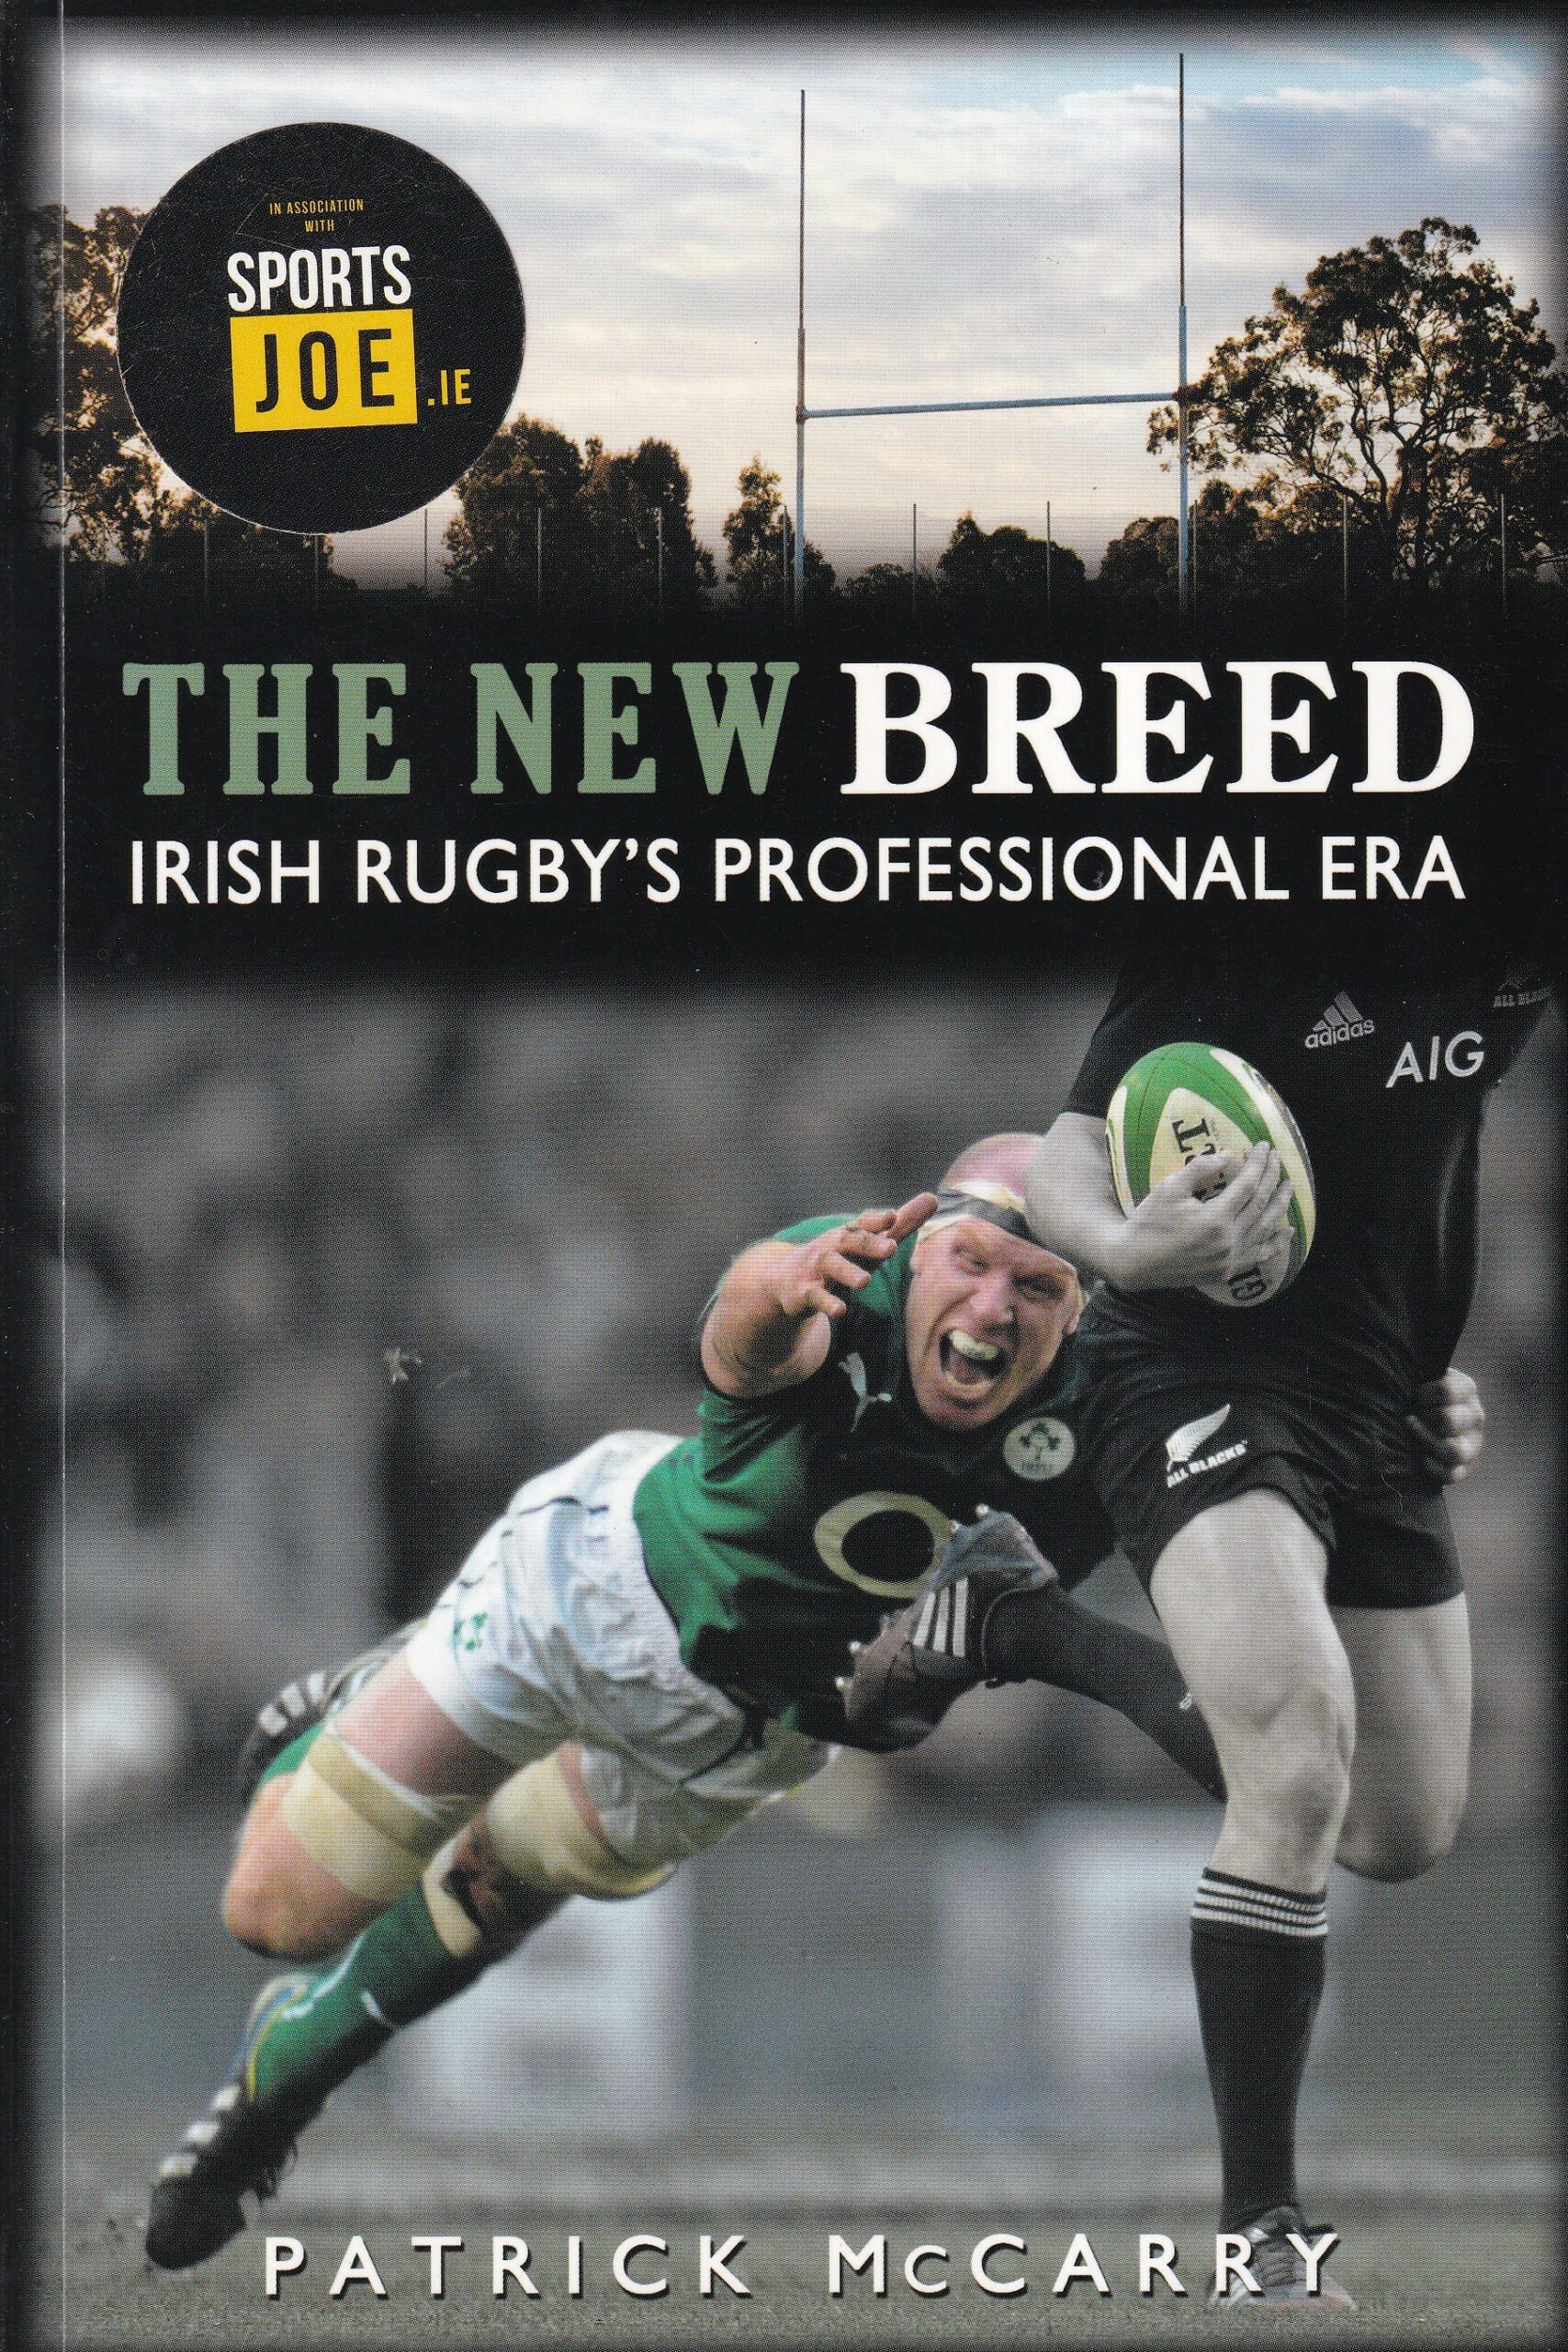 The New Breed: Irish Rugby’s Professional Era | Patrick McCarry | Charlie Byrne's